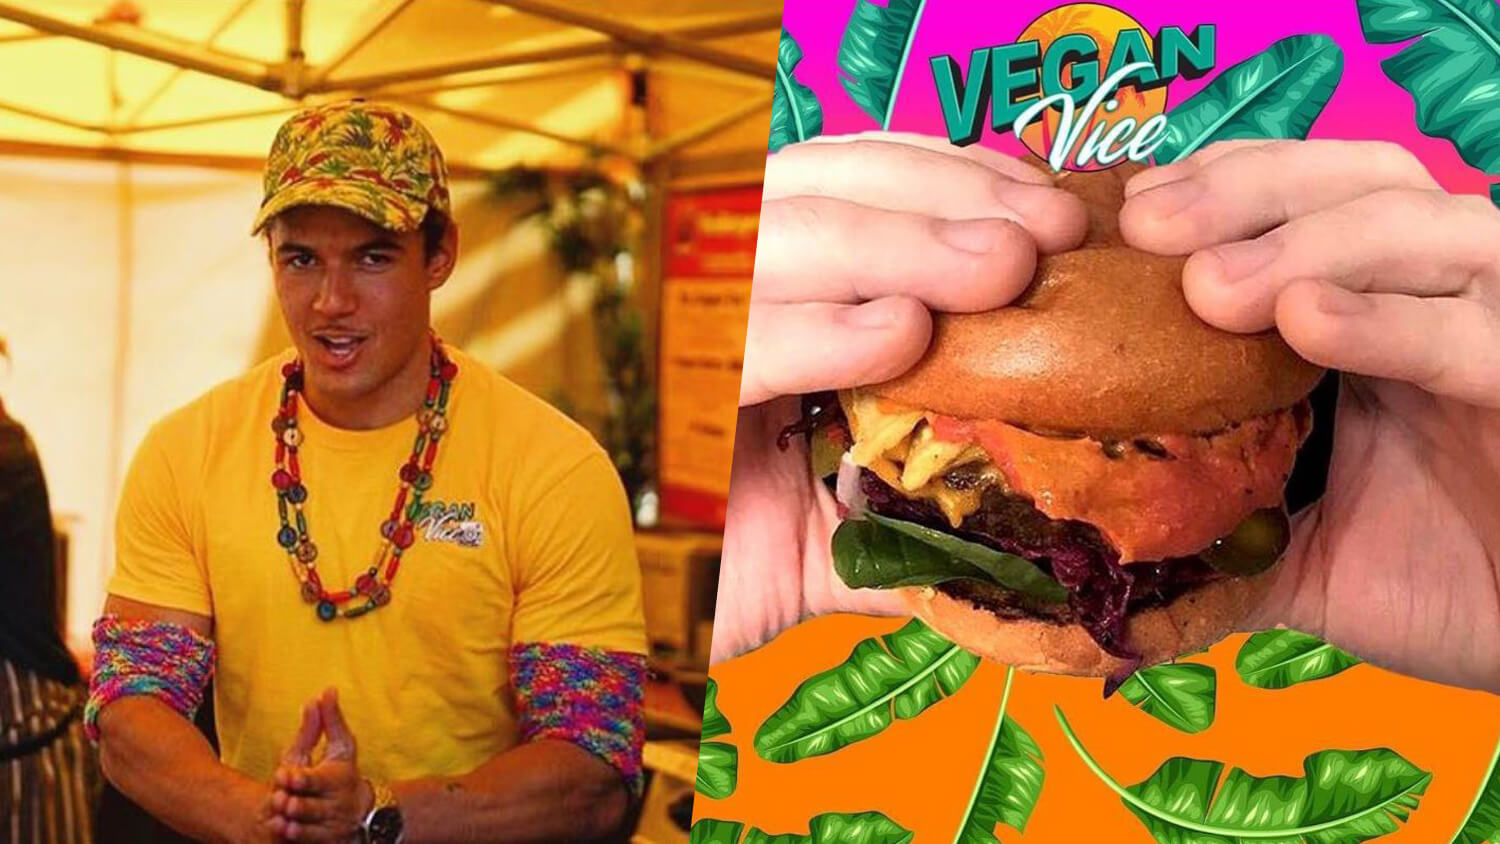 Miami Vice-Themed Restaurant to Serve High-Protein Vegan Burgers in Cambridge Cocktail Lounge Ta Bouche